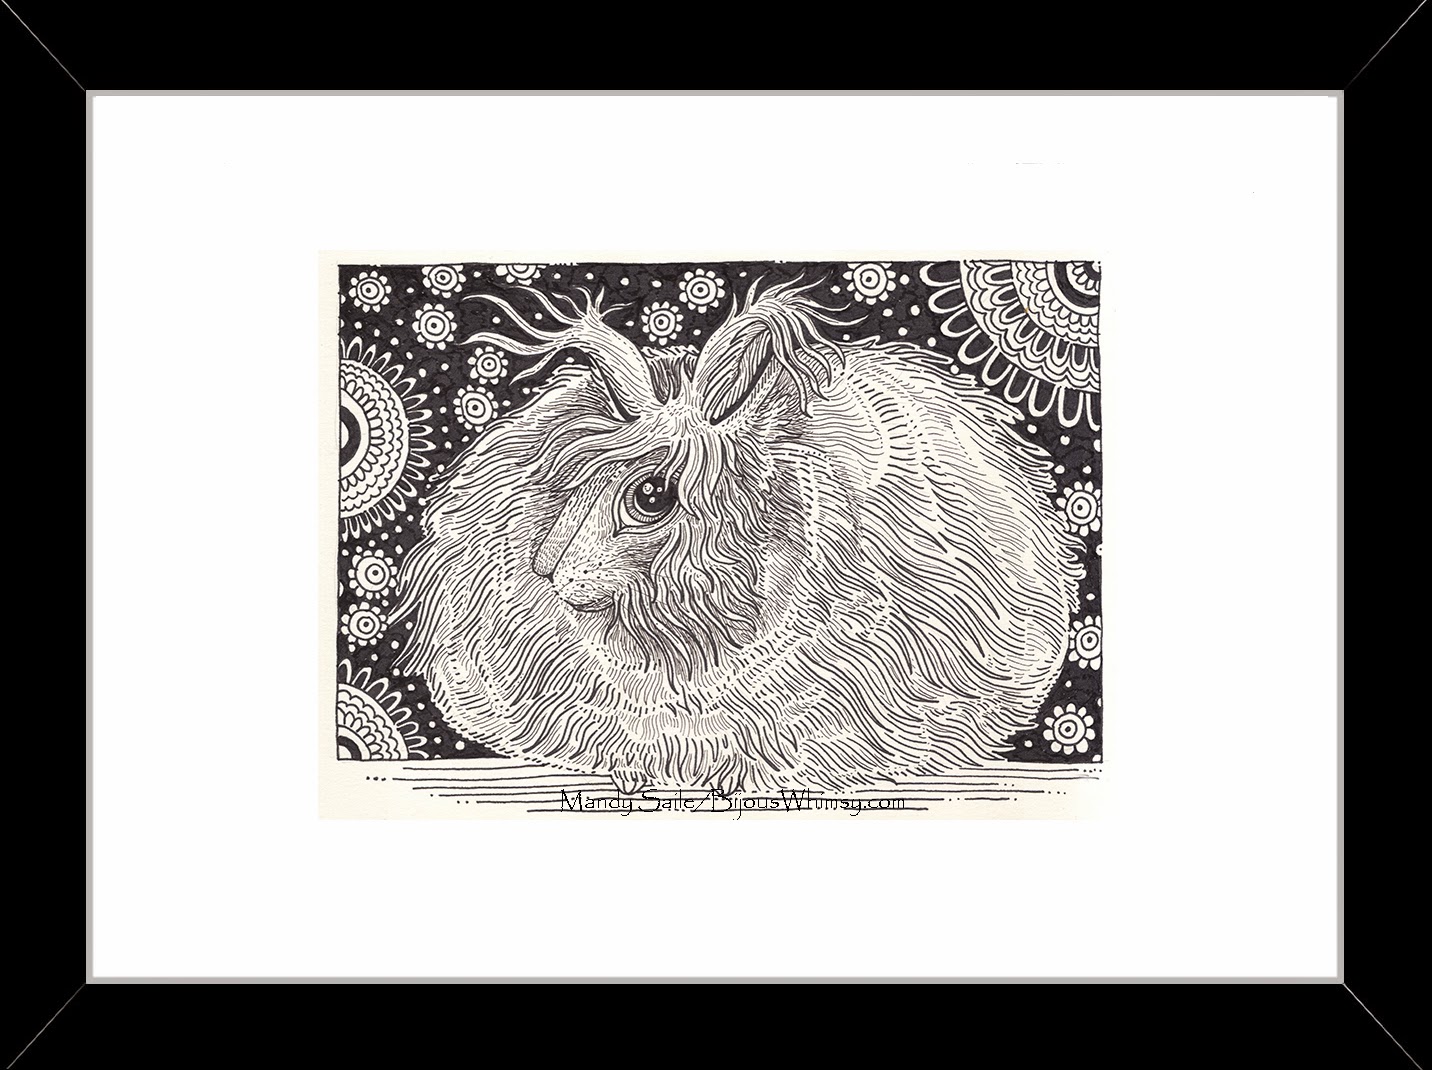 https://www.etsy.com/listing/209877854/rabbit-ink-drawing-7-8-x-10-print-a?ref=shop_home_active_12